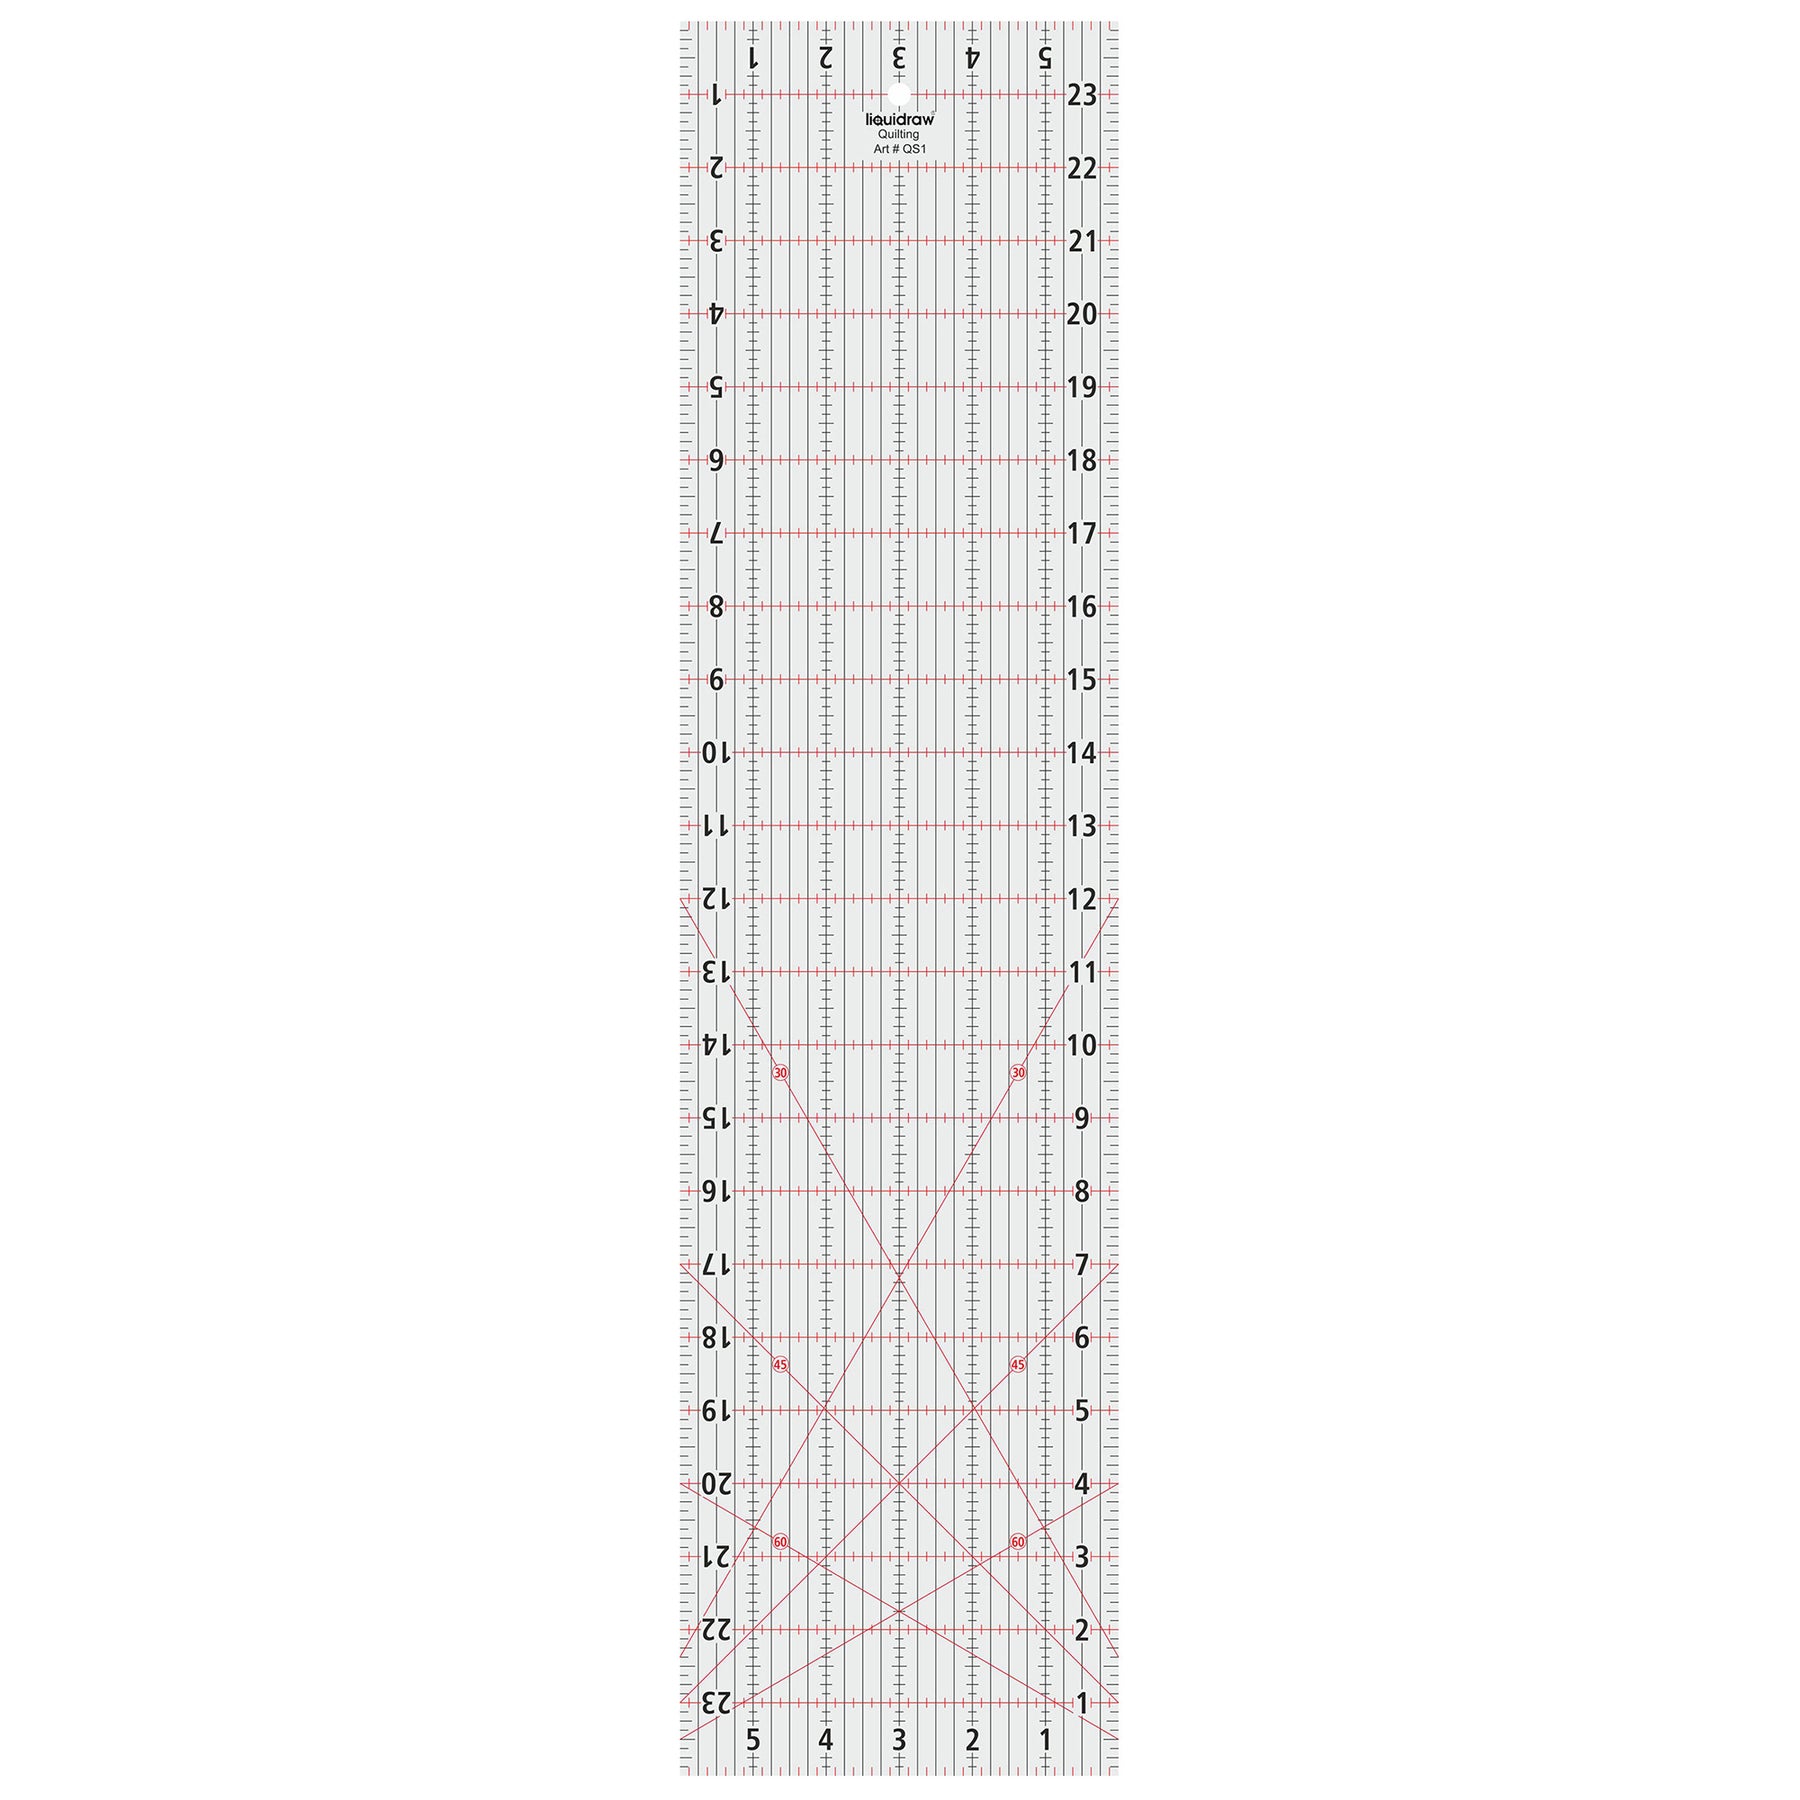 Liquidraw Quilting Ruler 8.5 x 12 Acrylic Imperial Patchwork Rectang